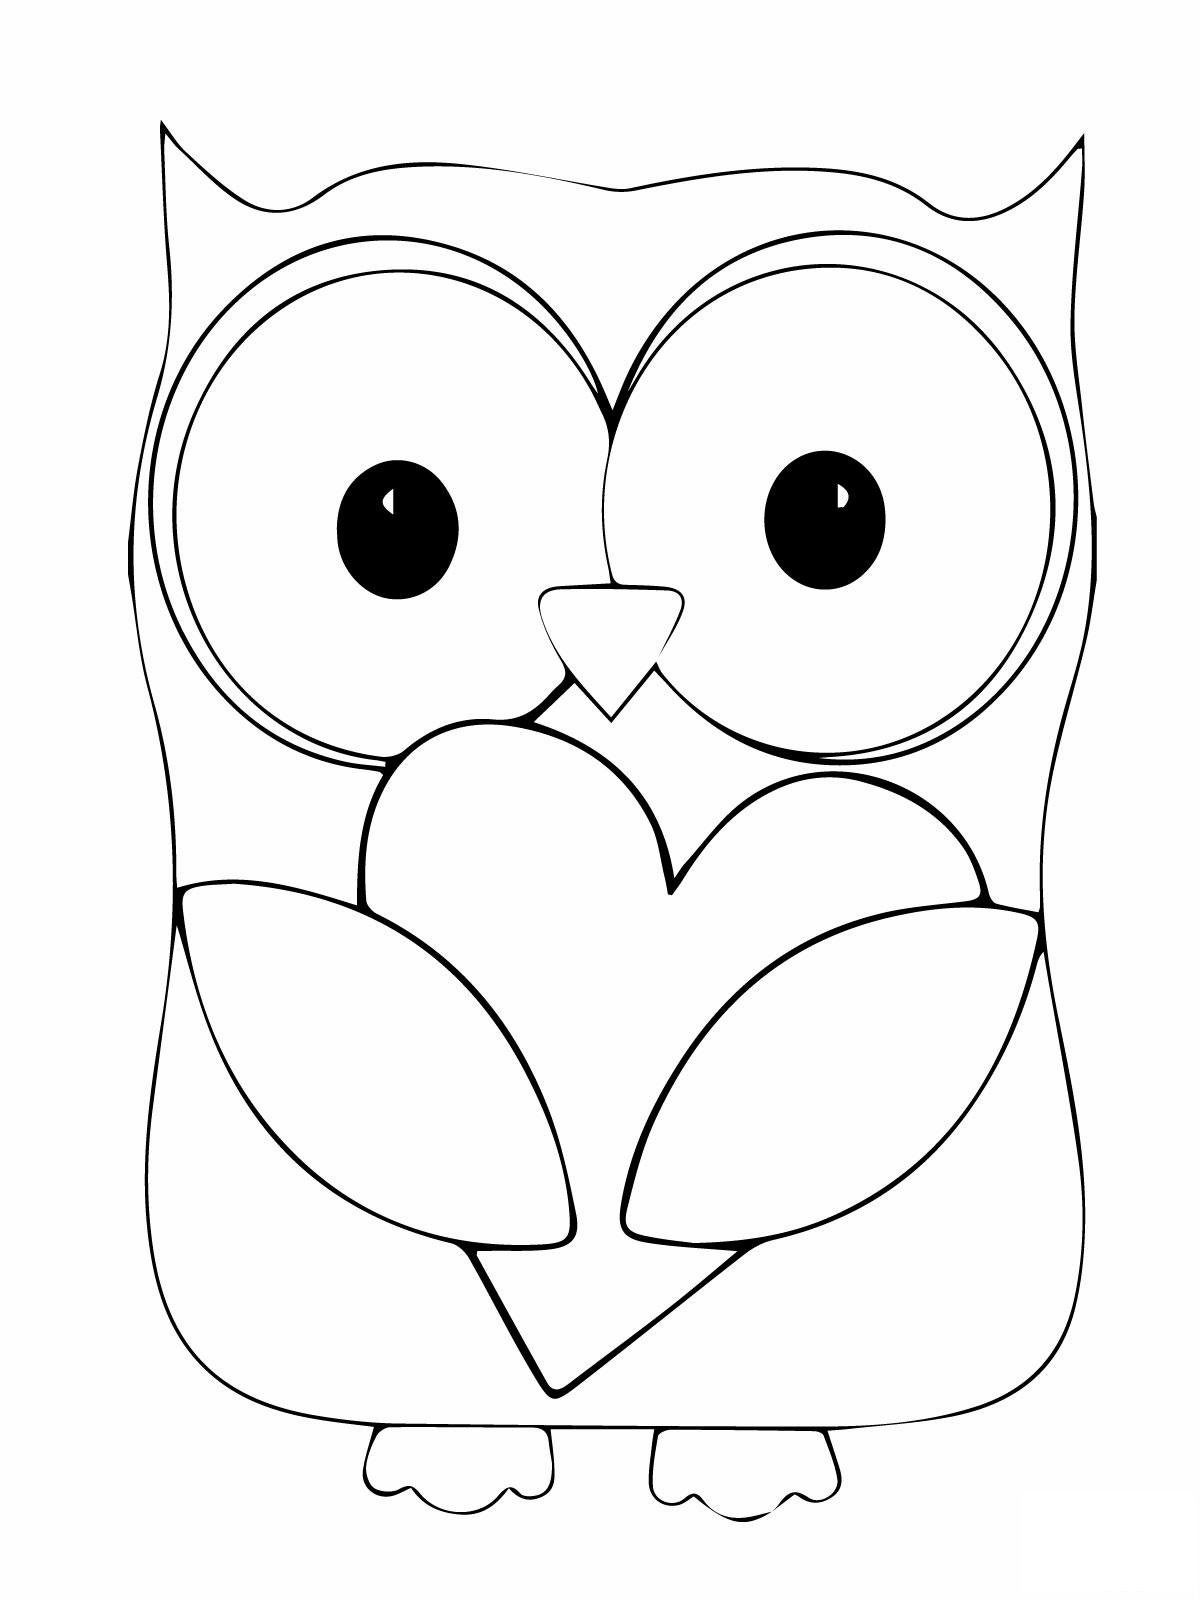 owl coloring page owl coloring pages for adults free detailed owl coloring owl coloring page 